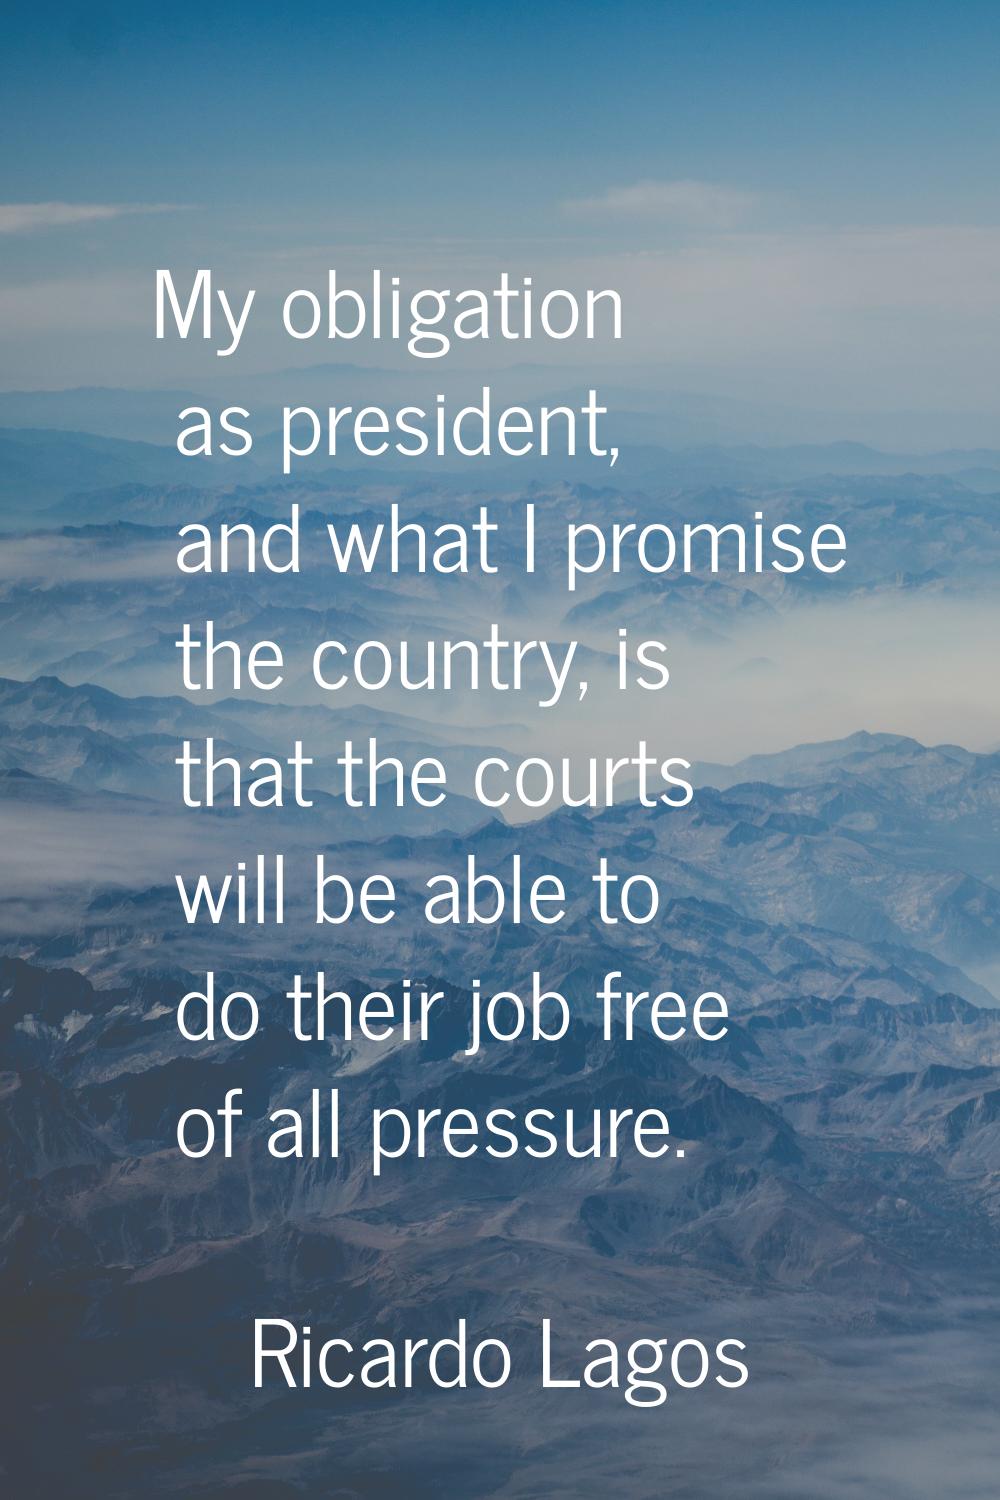 My obligation as president, and what I promise the country, is that the courts will be able to do t